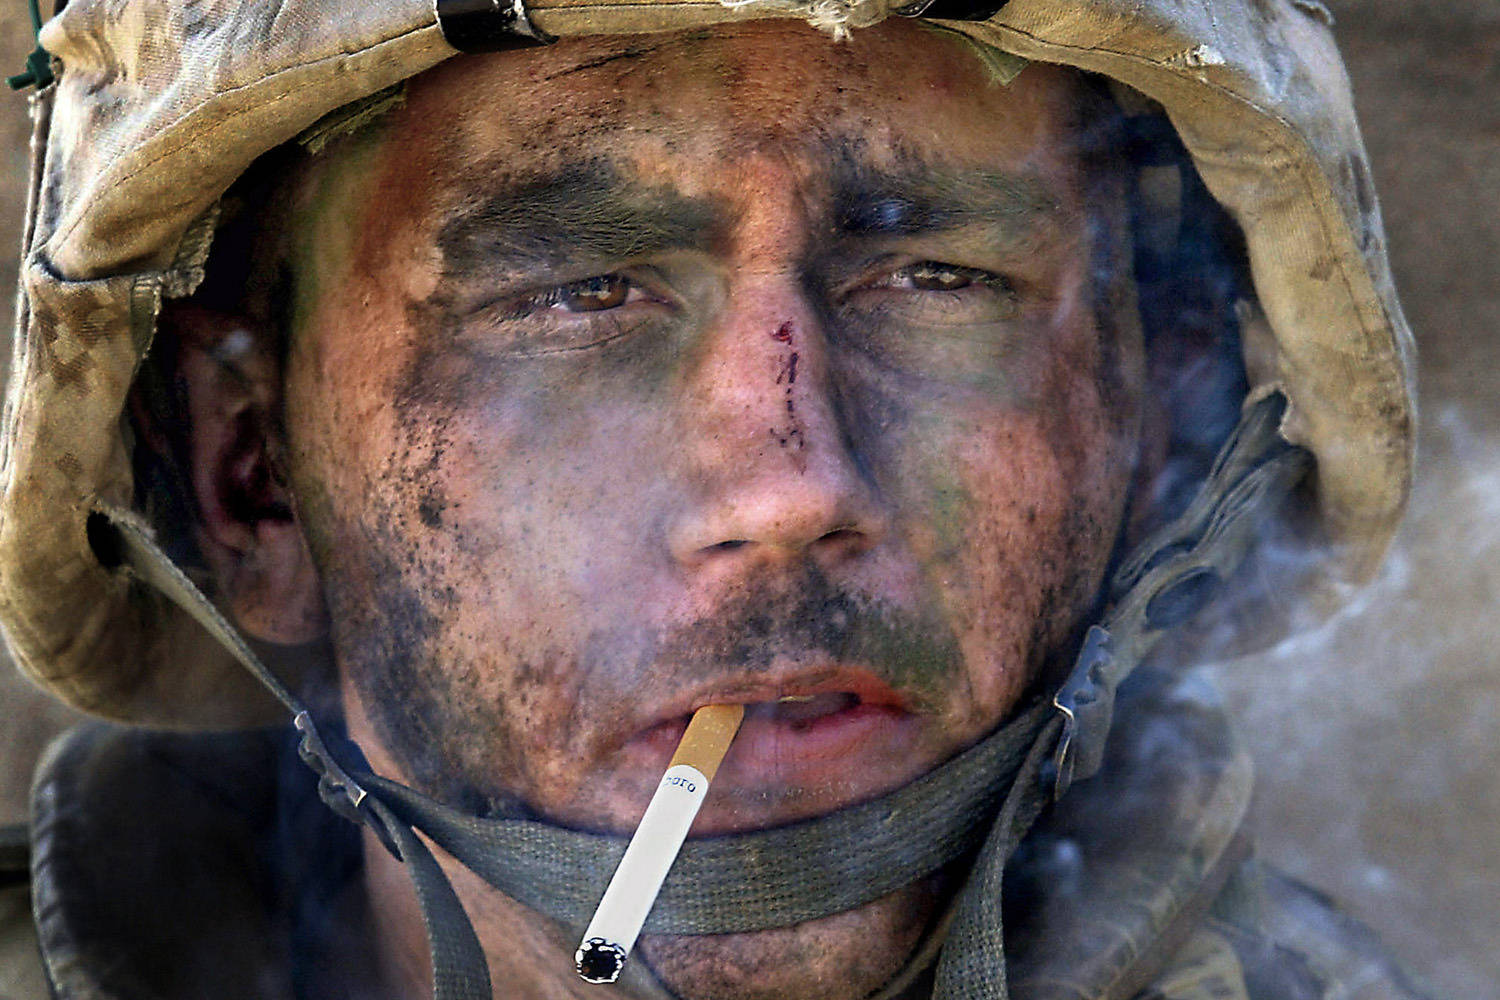 "Marlboro Marine", iconic photograph of James Blake Miller of the 1st Battalion, 8th Marine Regiment, a unit which took part in the Second Battle of Fallujah in November 2004. He was later diagnosed having PTSD.